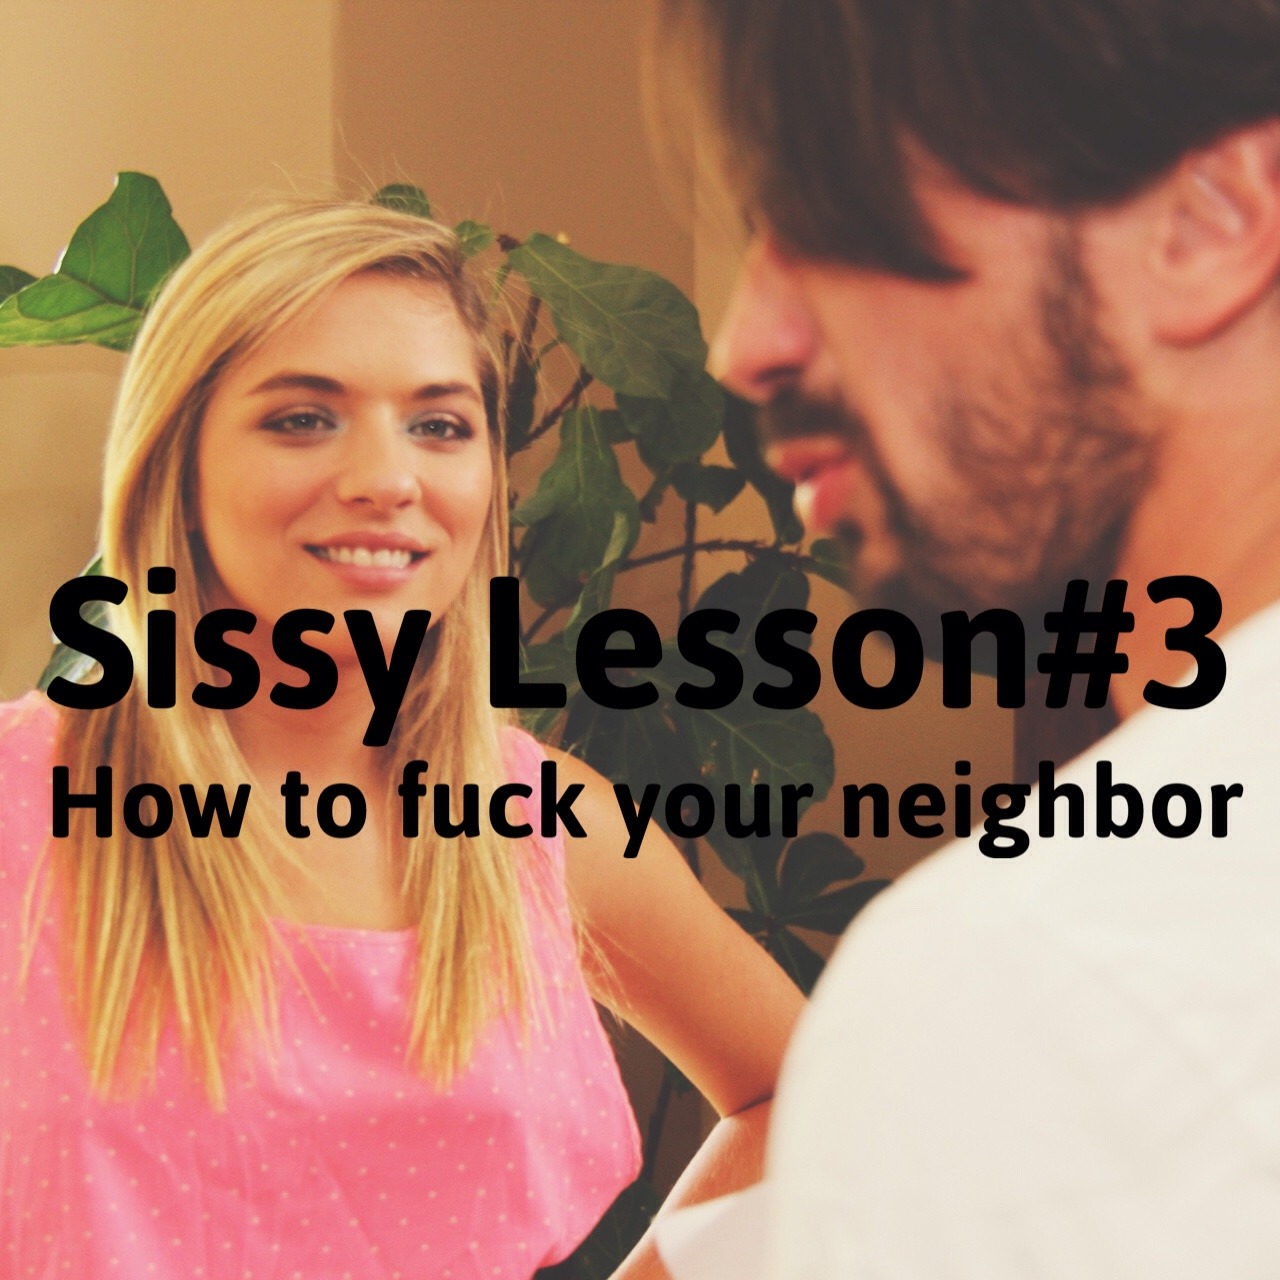 sissyrulez:  Sissy Lesson#3: How to fuck your neighbor  I know how all you Sissy